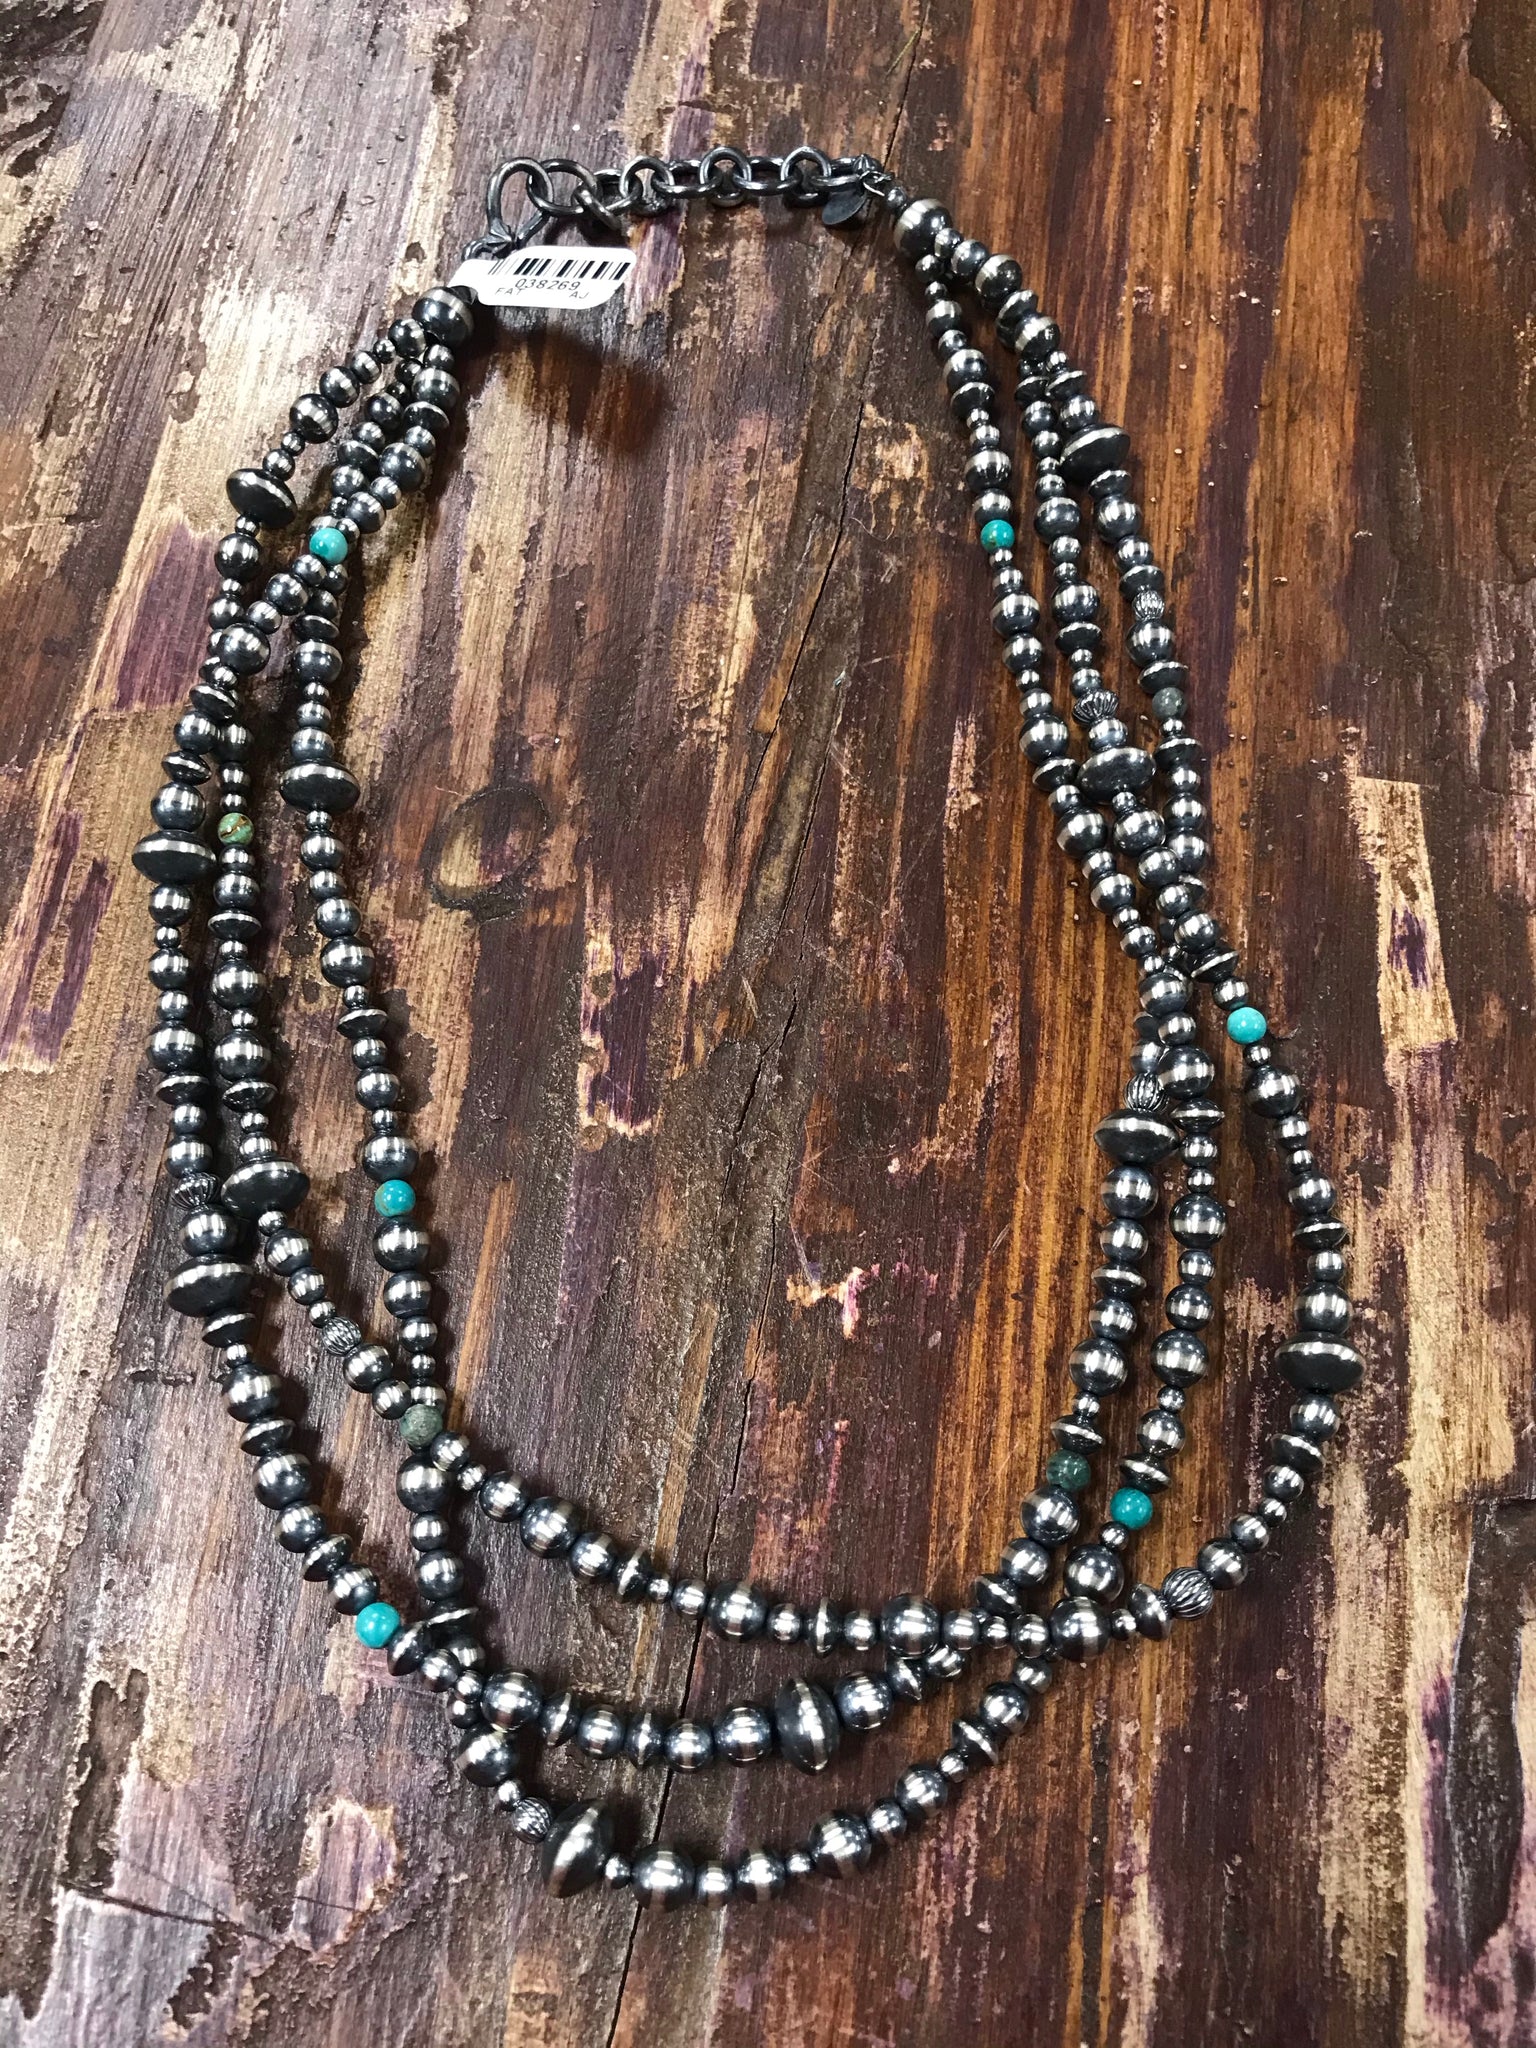 3 Strand Navajo Pearl/Turquoise Necklace